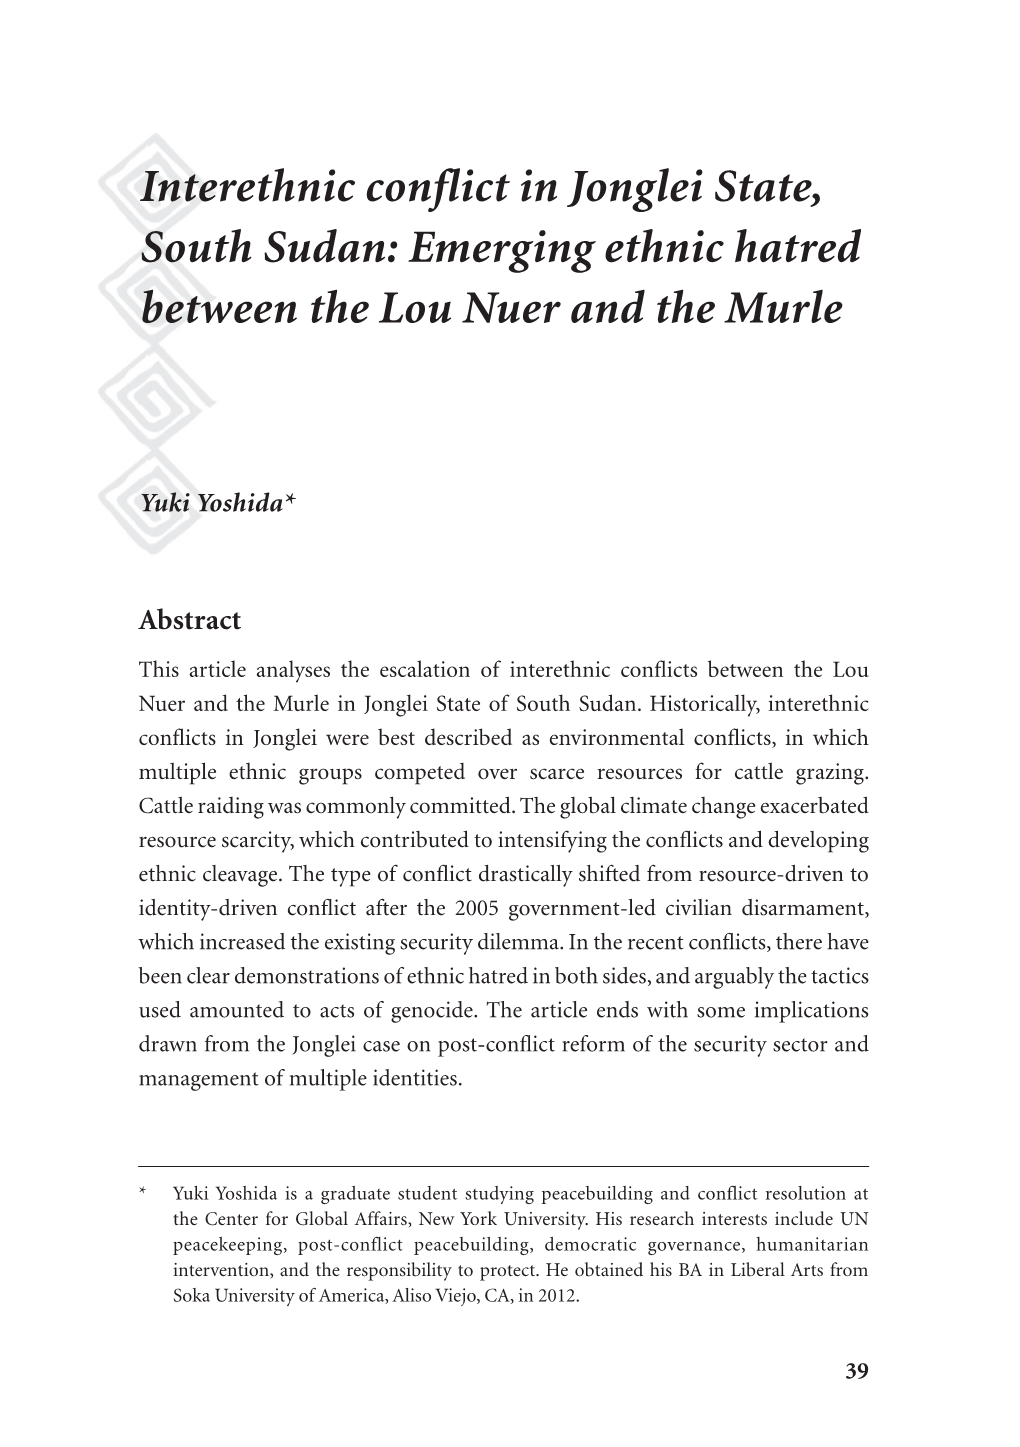 Interethnic Conflict in Jonglei State, South Sudan: Emerging Ethnic Hatred Between the Lou Nuer and the Murle